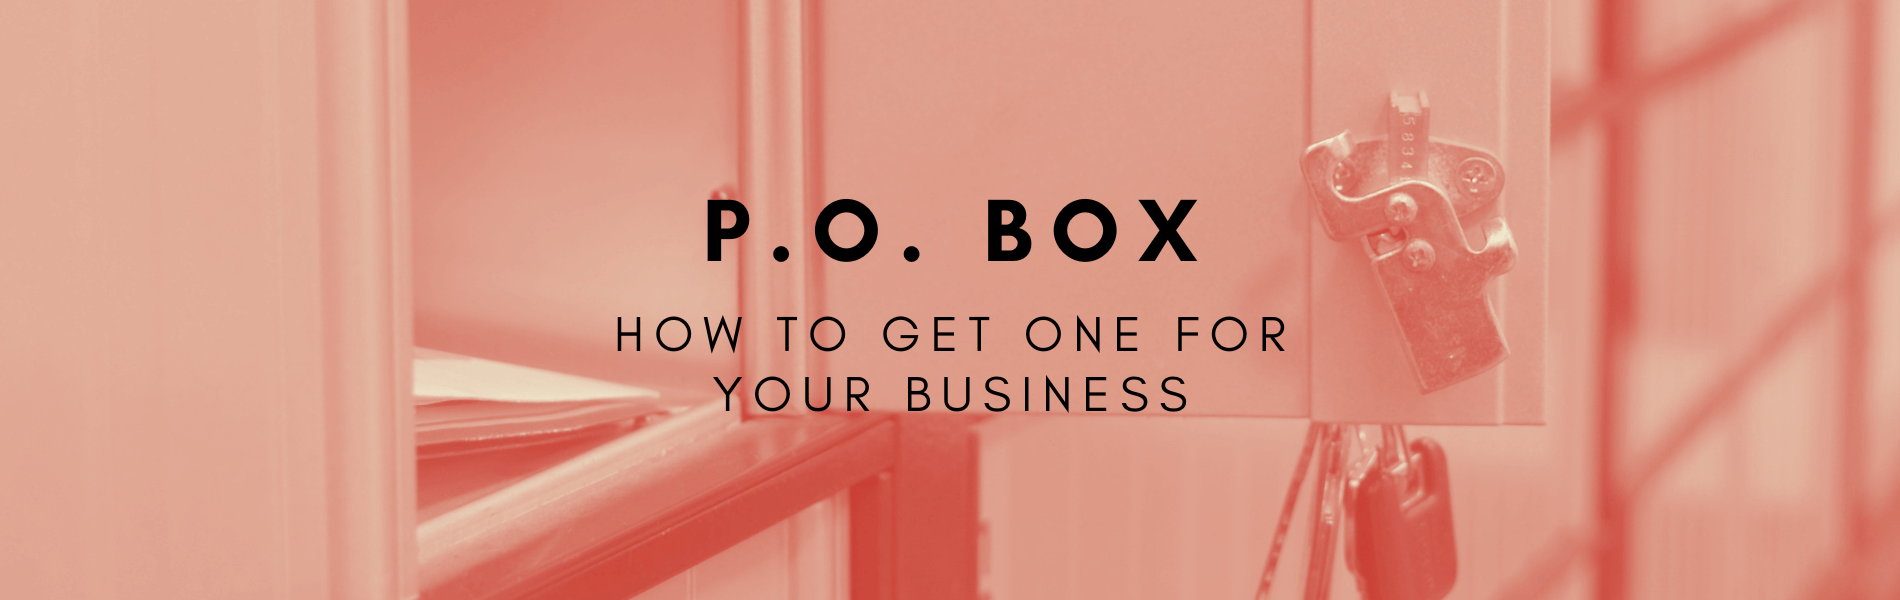 how to get a po box for a business